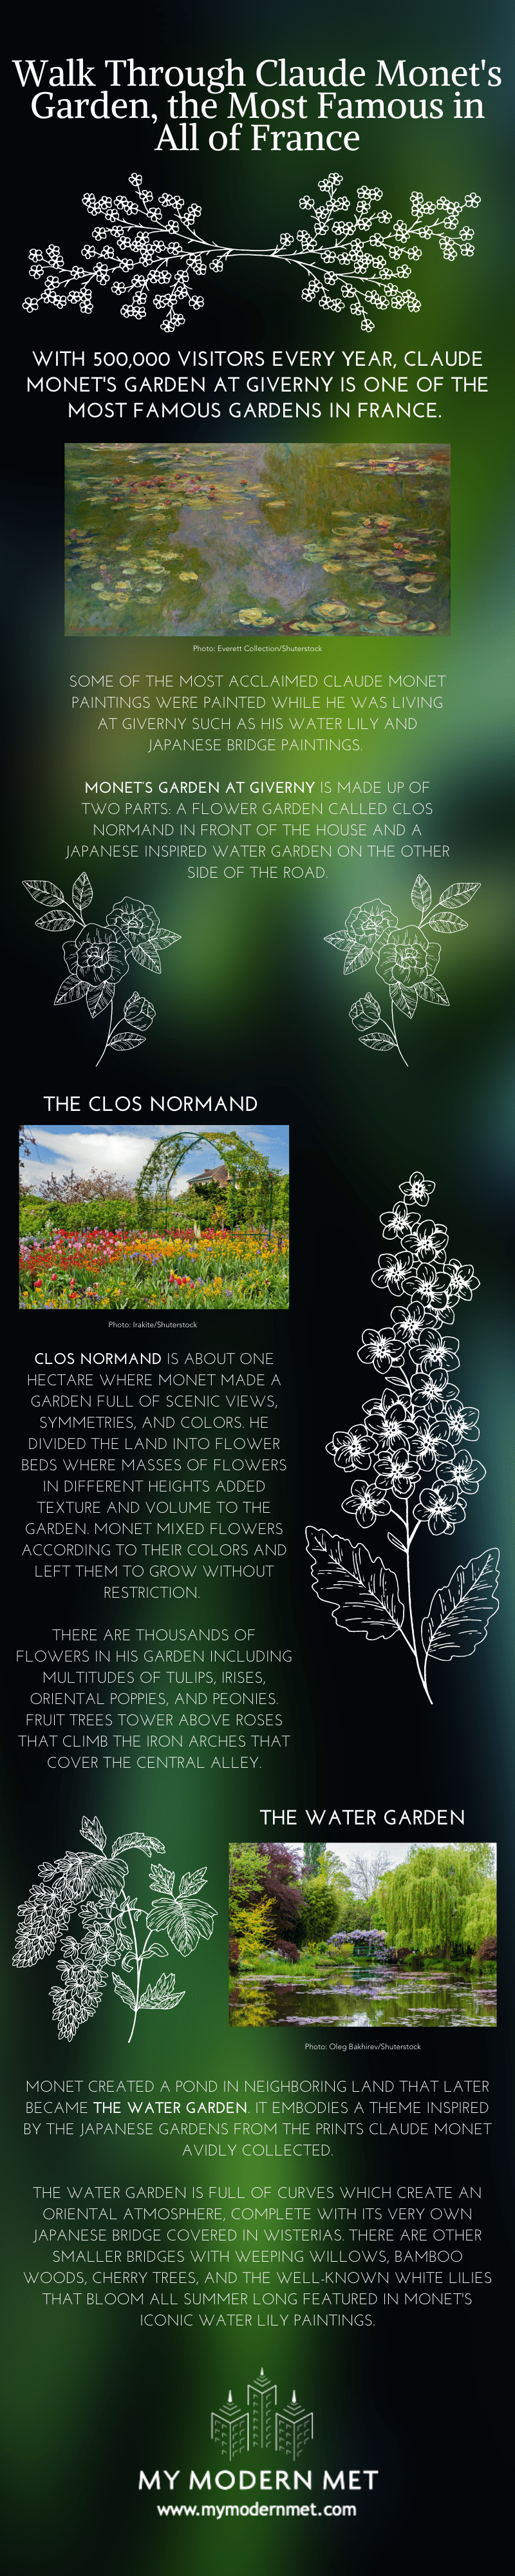 Claude Monet's Garden at Giverny Infographic by My Modern Met